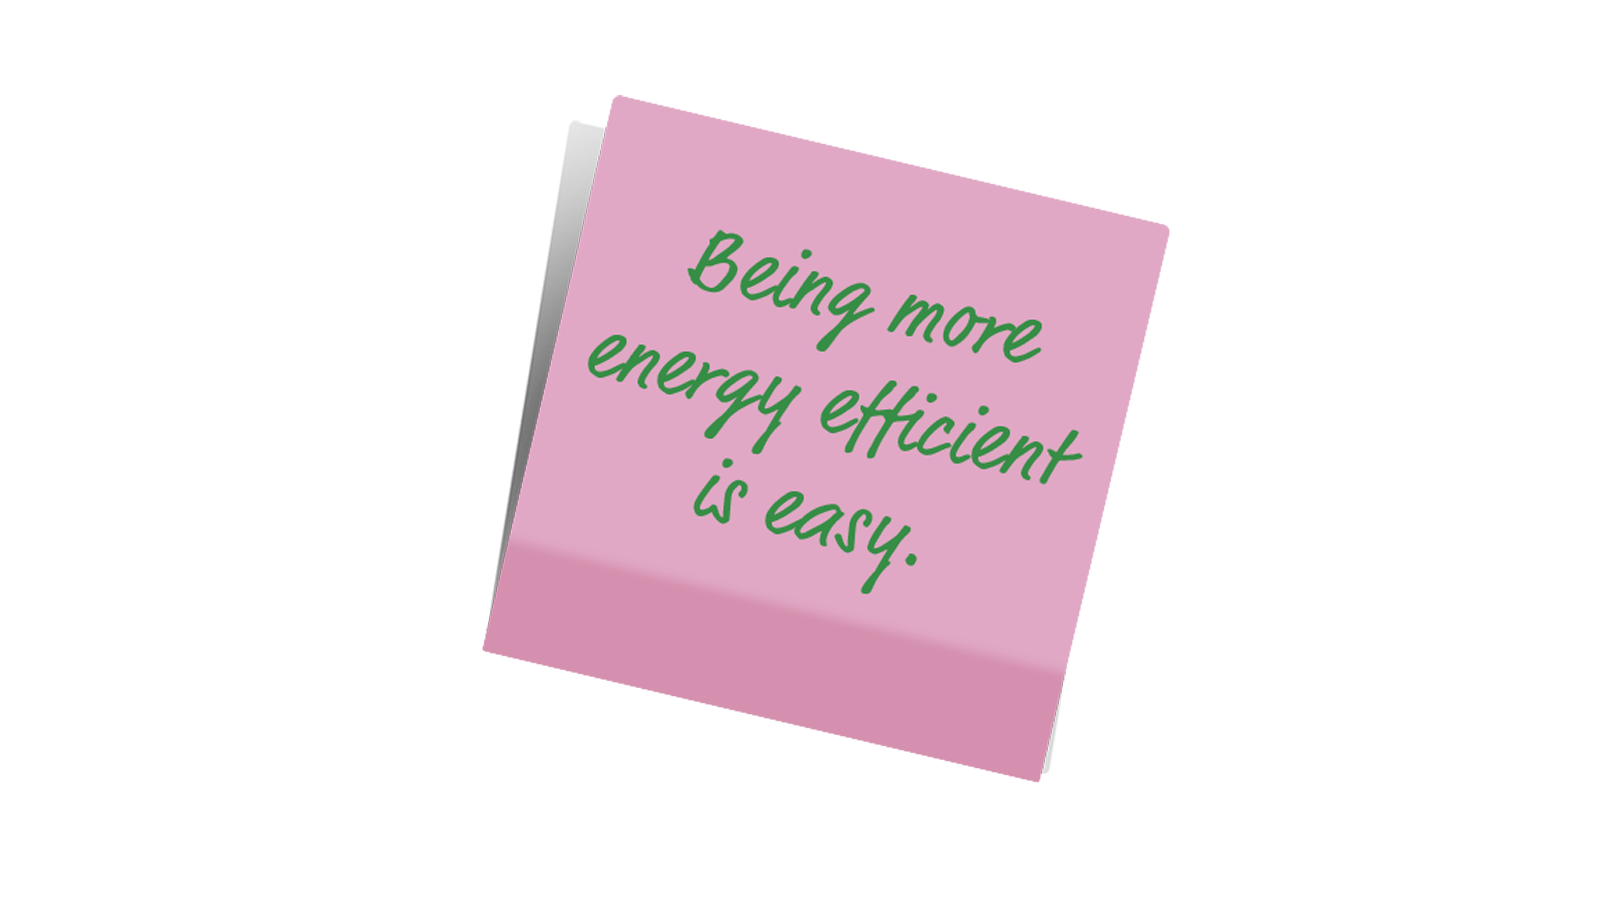 post-it note reading "being more energy efficient is easy"